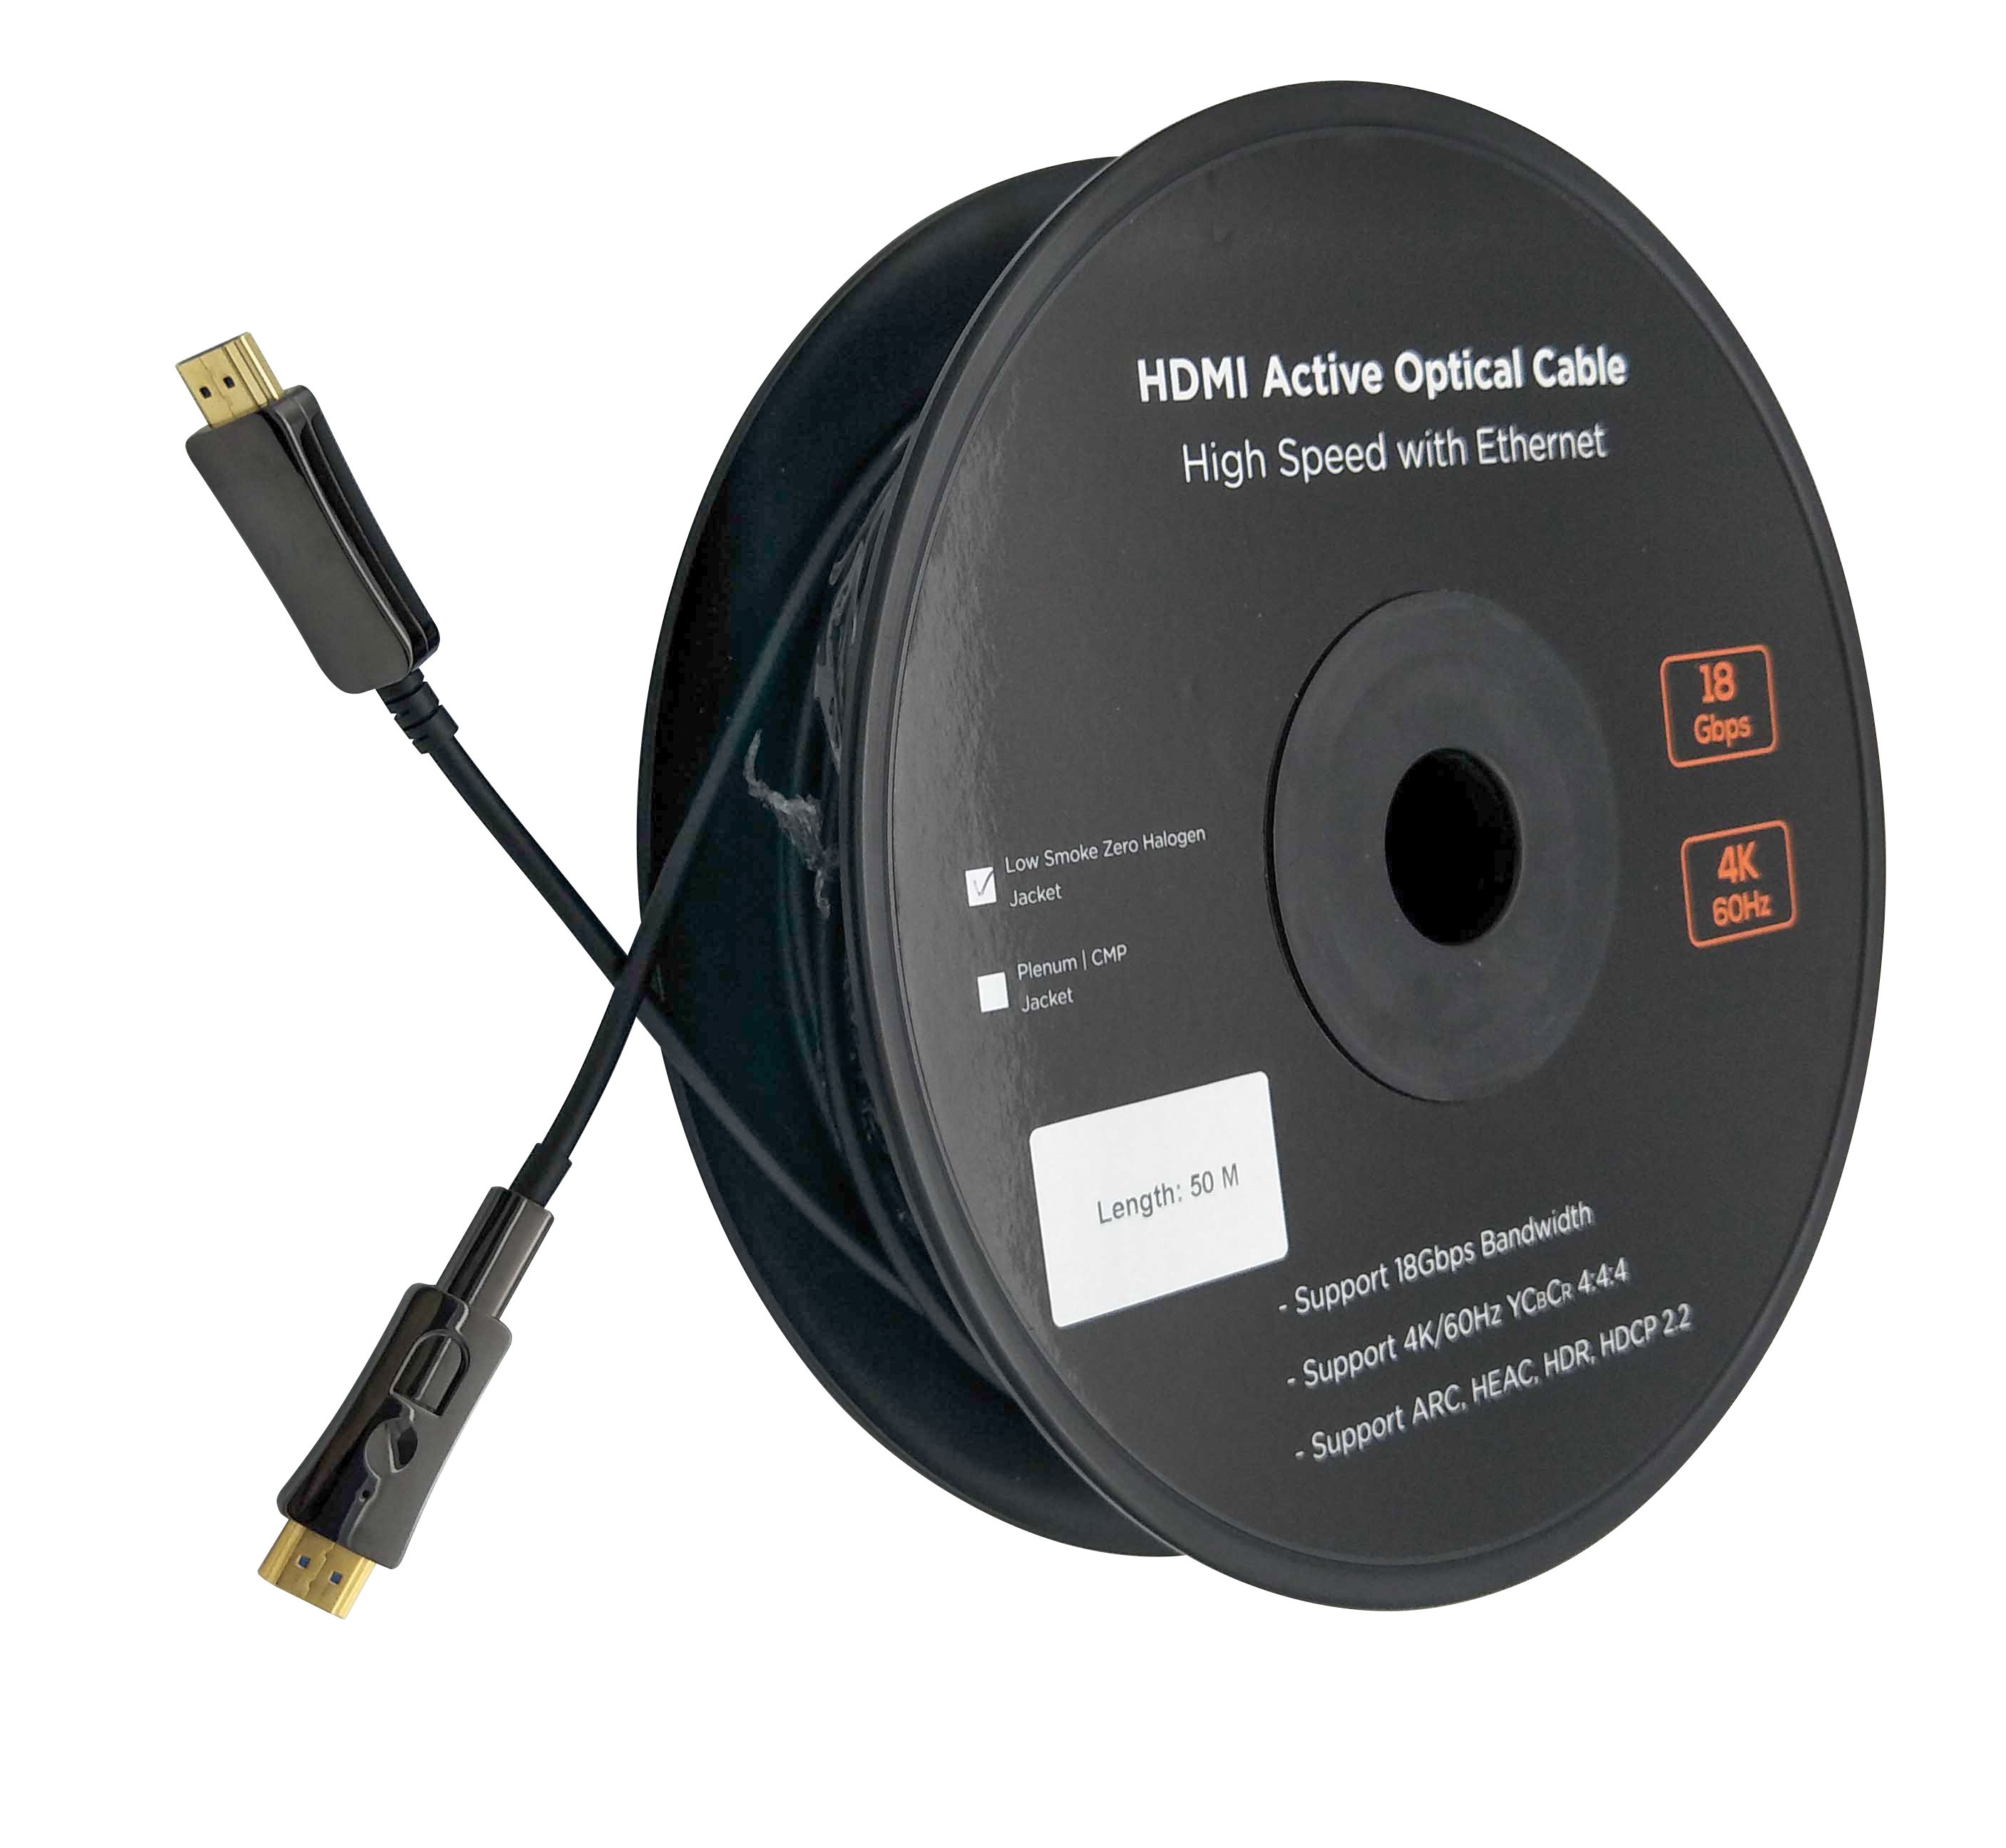 HDMI Active optical Cable: High Speed with Ethernet